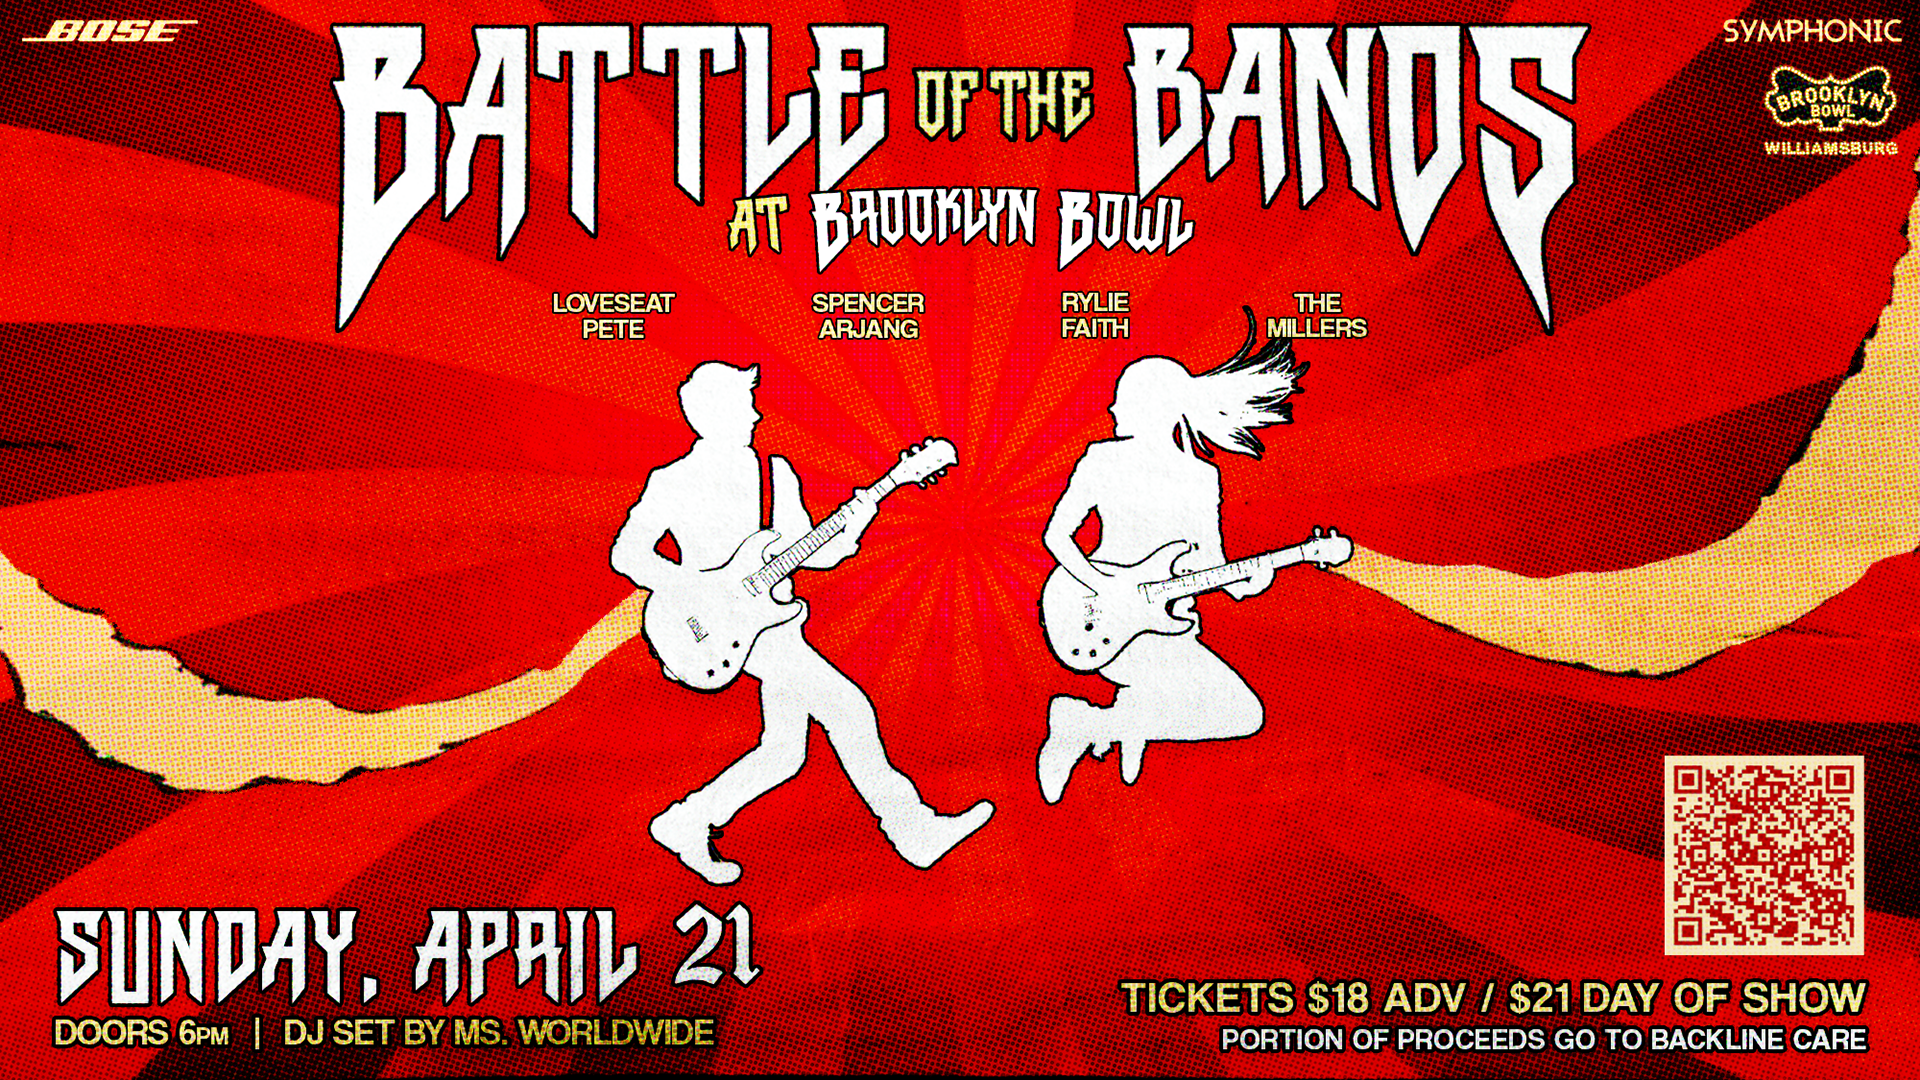 BATTLE OF THE BANDS FEAT. LOVESEAT PETE, SPENCER ARJANG, RYLIE FAITH, THE MILLERS